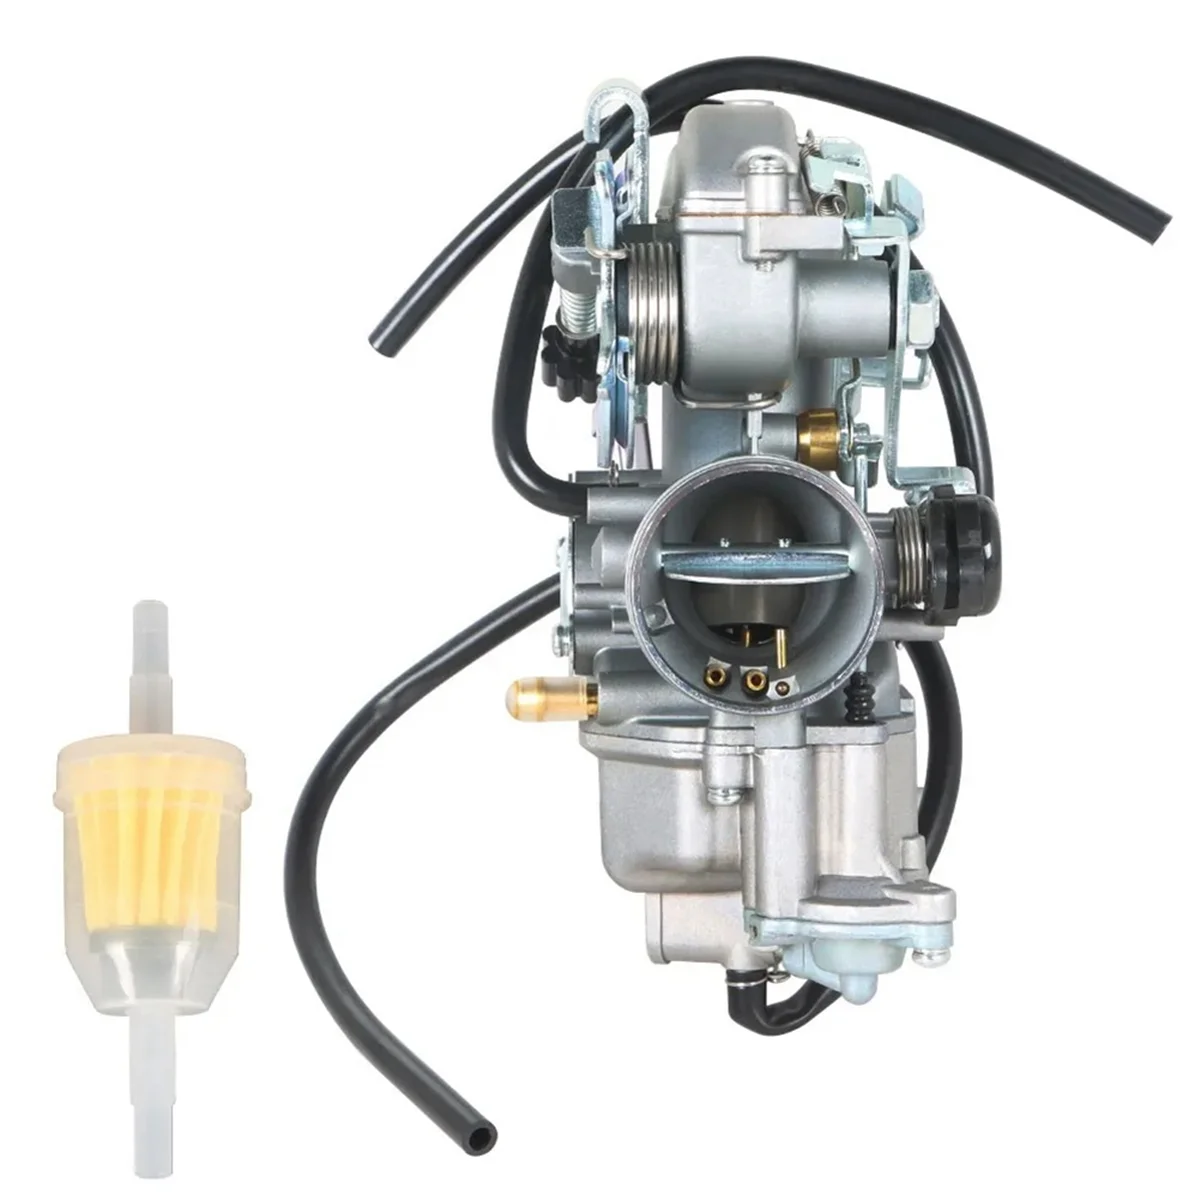 

Motorcycle Carburetor with Fuel Filter Kit for Honda XL 250 XL250 XL 250S XL250S Motor Bike Carb 1978 -1980